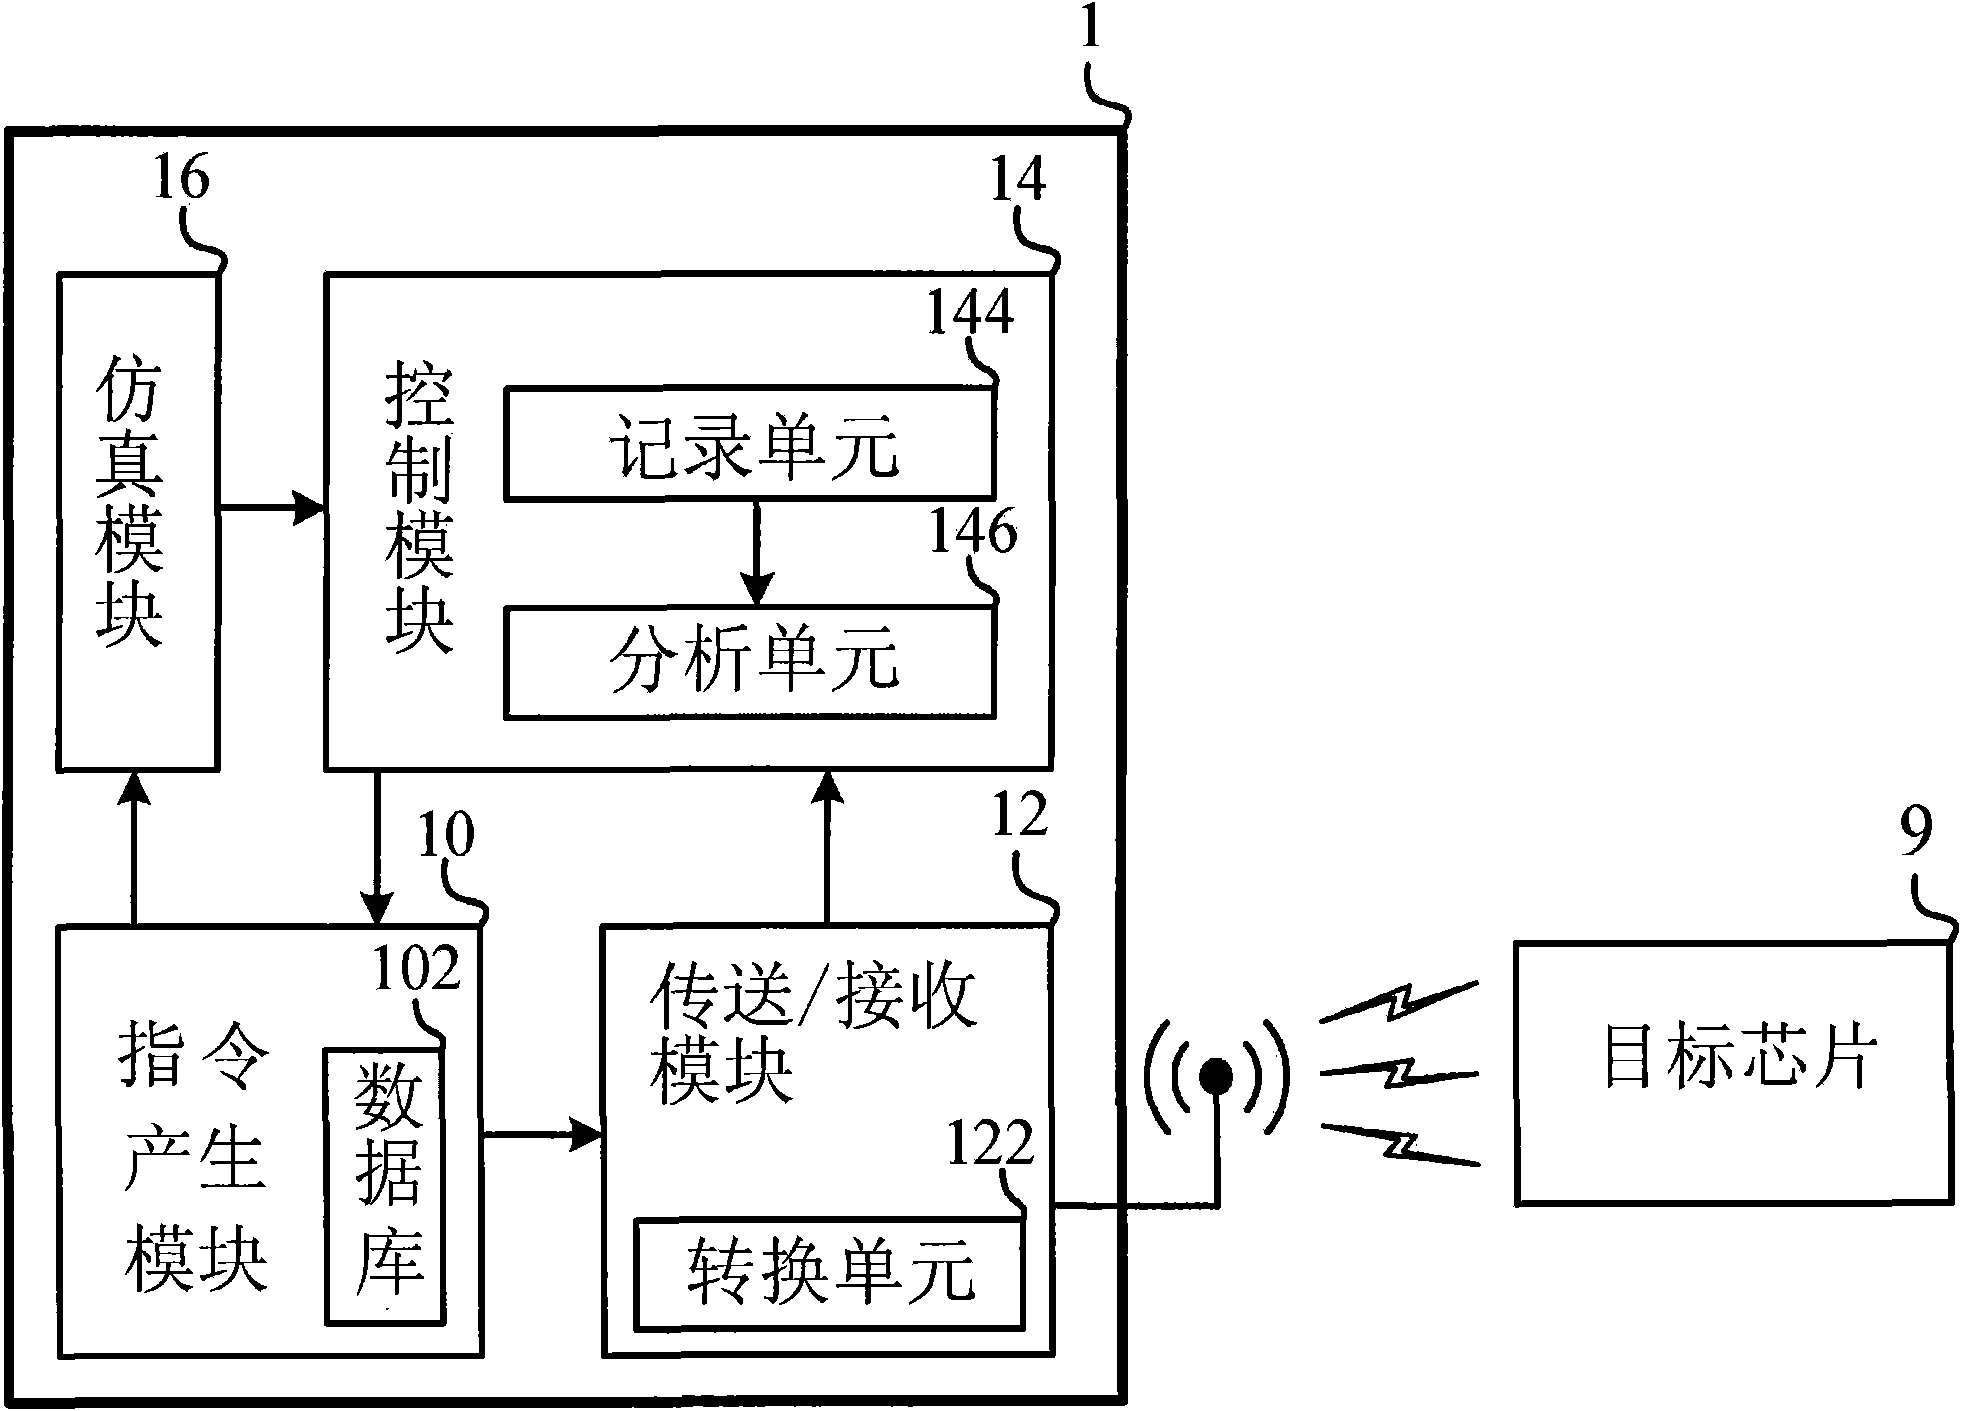 Chip testing device and chip testing method